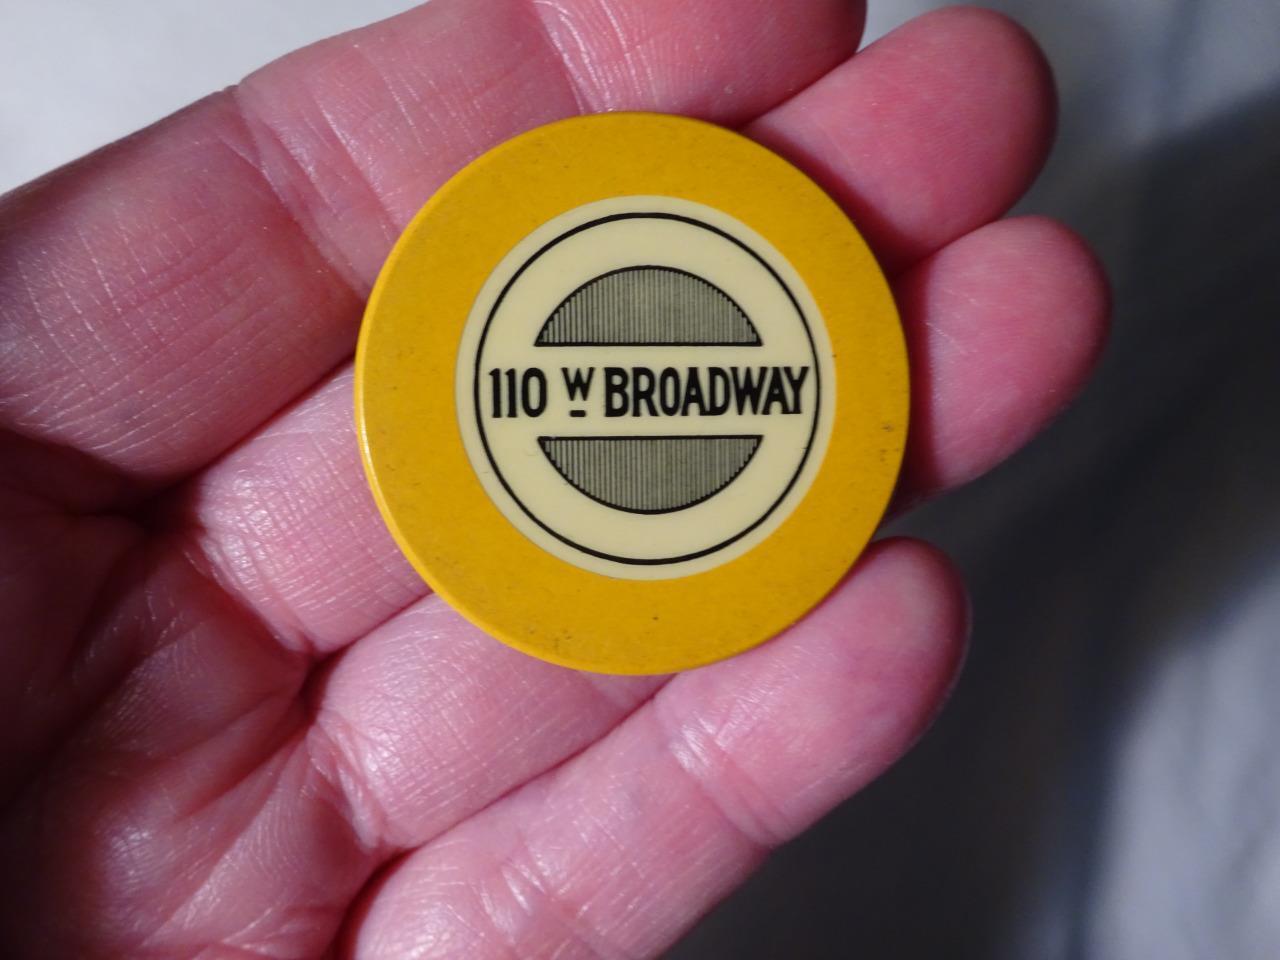 1925 RARE YELLOW 110 W BROADWAY CHICAGO ILL. C&S CREST & SEAL POKER CHIP VG